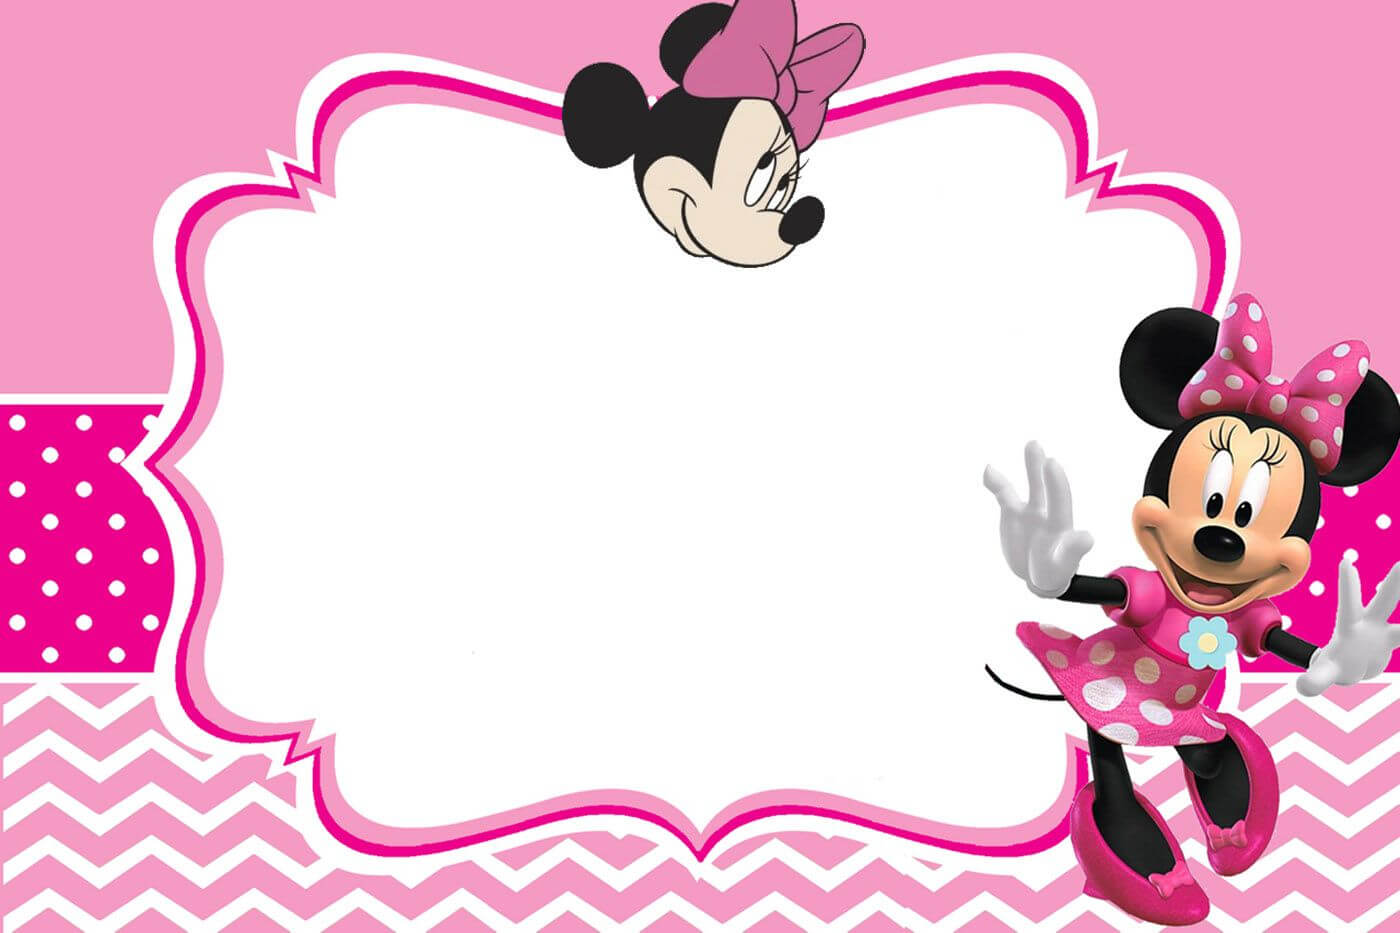 Minnie Mouse Invitation Card Design | Jmj In 2019 | Mickey Pertaining To Minnie Mouse Card Templates